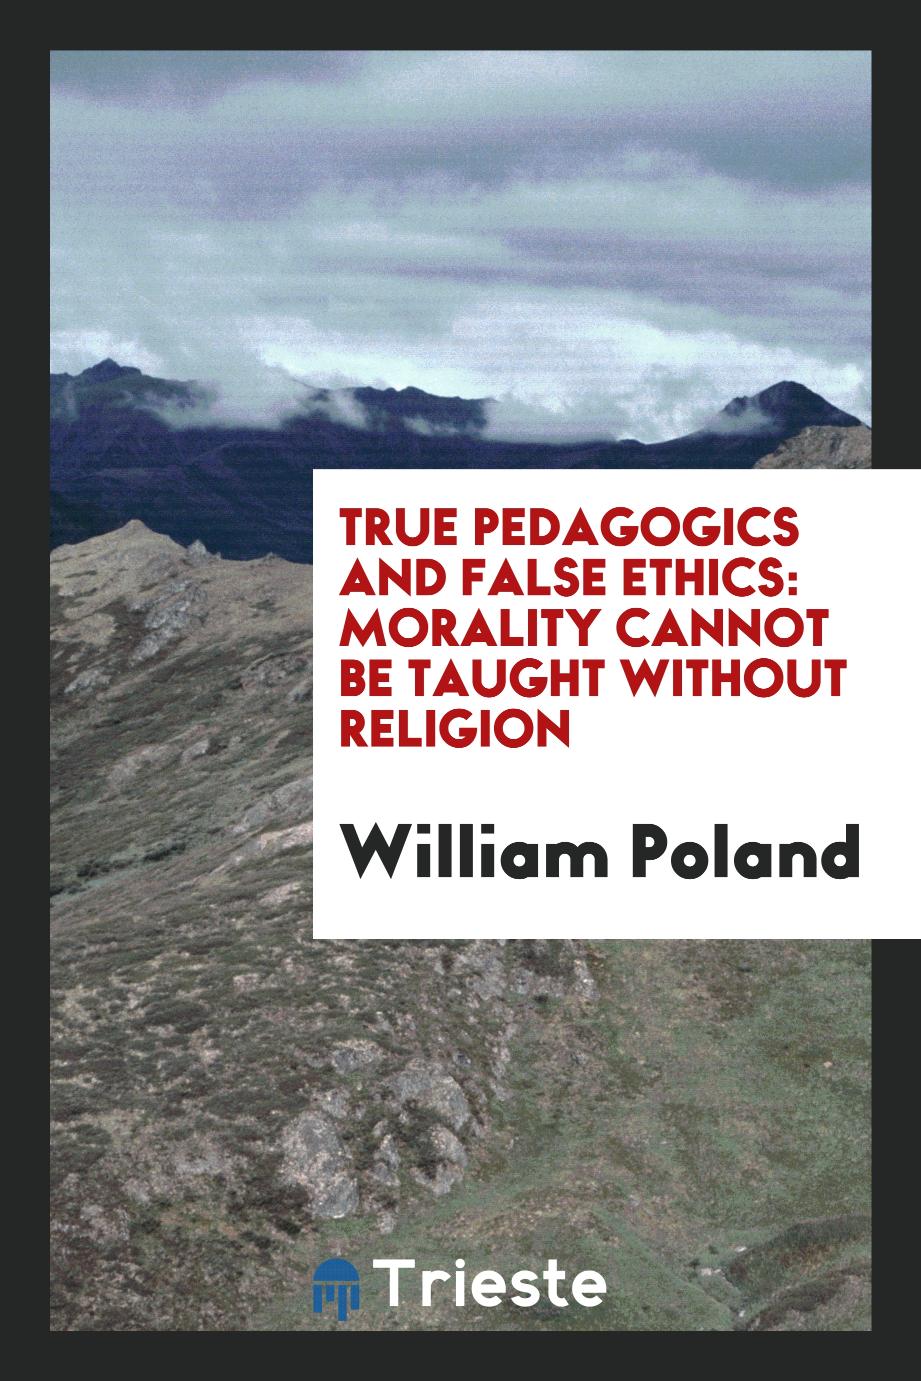 True Pedagogics and False Ethics: Morality Cannot be Taught Without Religion